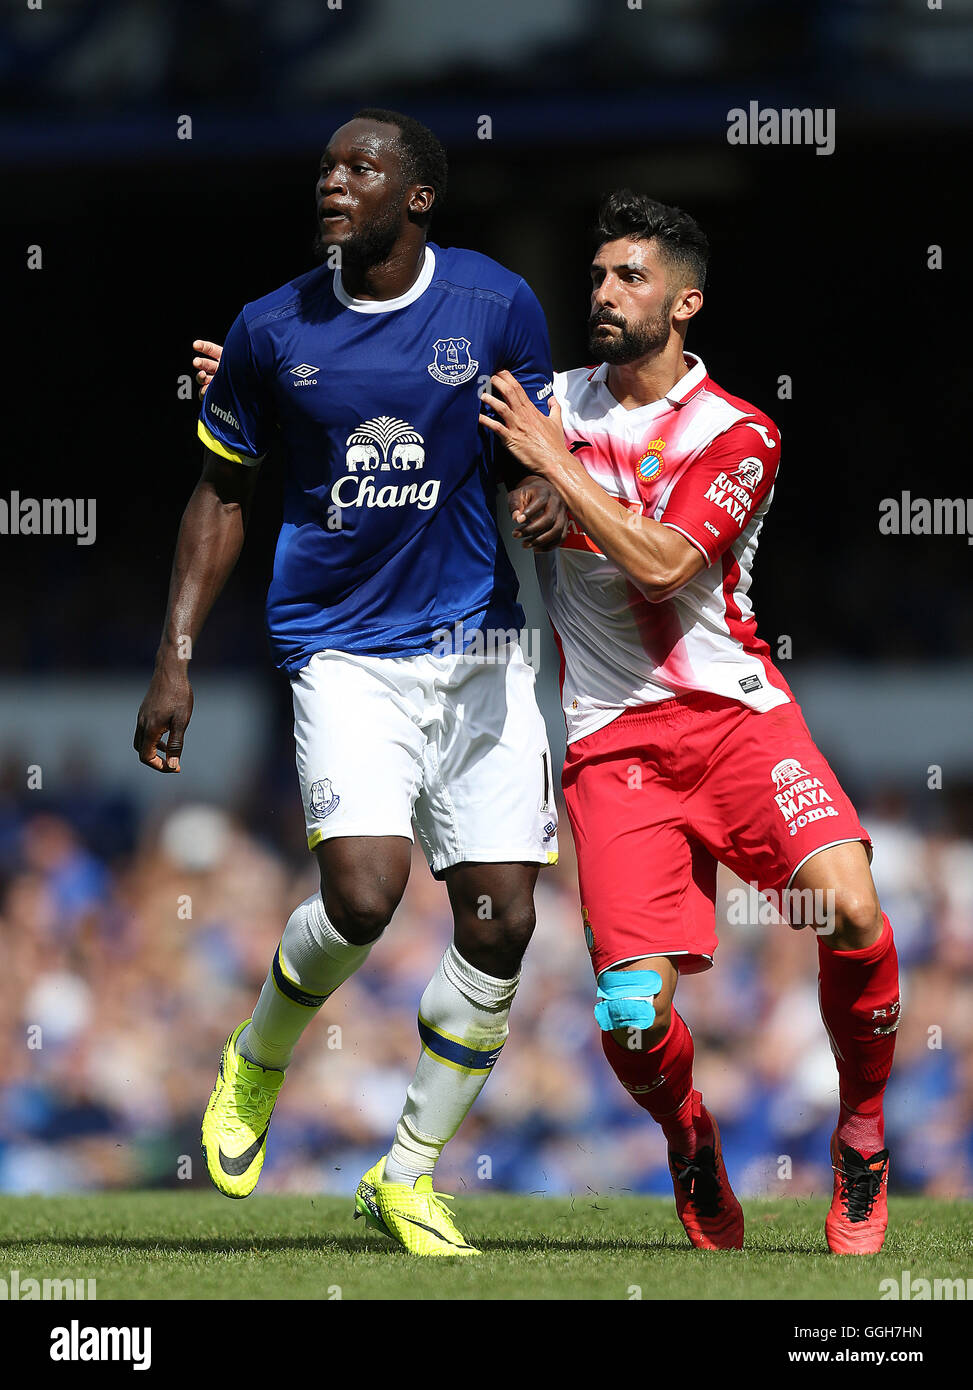 Everton's Romelu Lukaku (left) and Espanyol's Alvaro Gonzalez battle for the ball during the pre-season friendly match at Goodison Park, Liverpool. PRESS ASSOCIATION Photo. Picture date: Saturday August 6, 2016. See PA story SOCCER Everton. Photo credit should read: Barrington Coombs/PA Wire. RESTRICTIONS: EDITORIAL USE ONLY No use with unauthorised audio, video, data, fixture lists, club/league logos or 'live' services. Online in-match use limited to 75 images, no video emulation. No use in betting, games or single club/league/player publications. Stock Photo